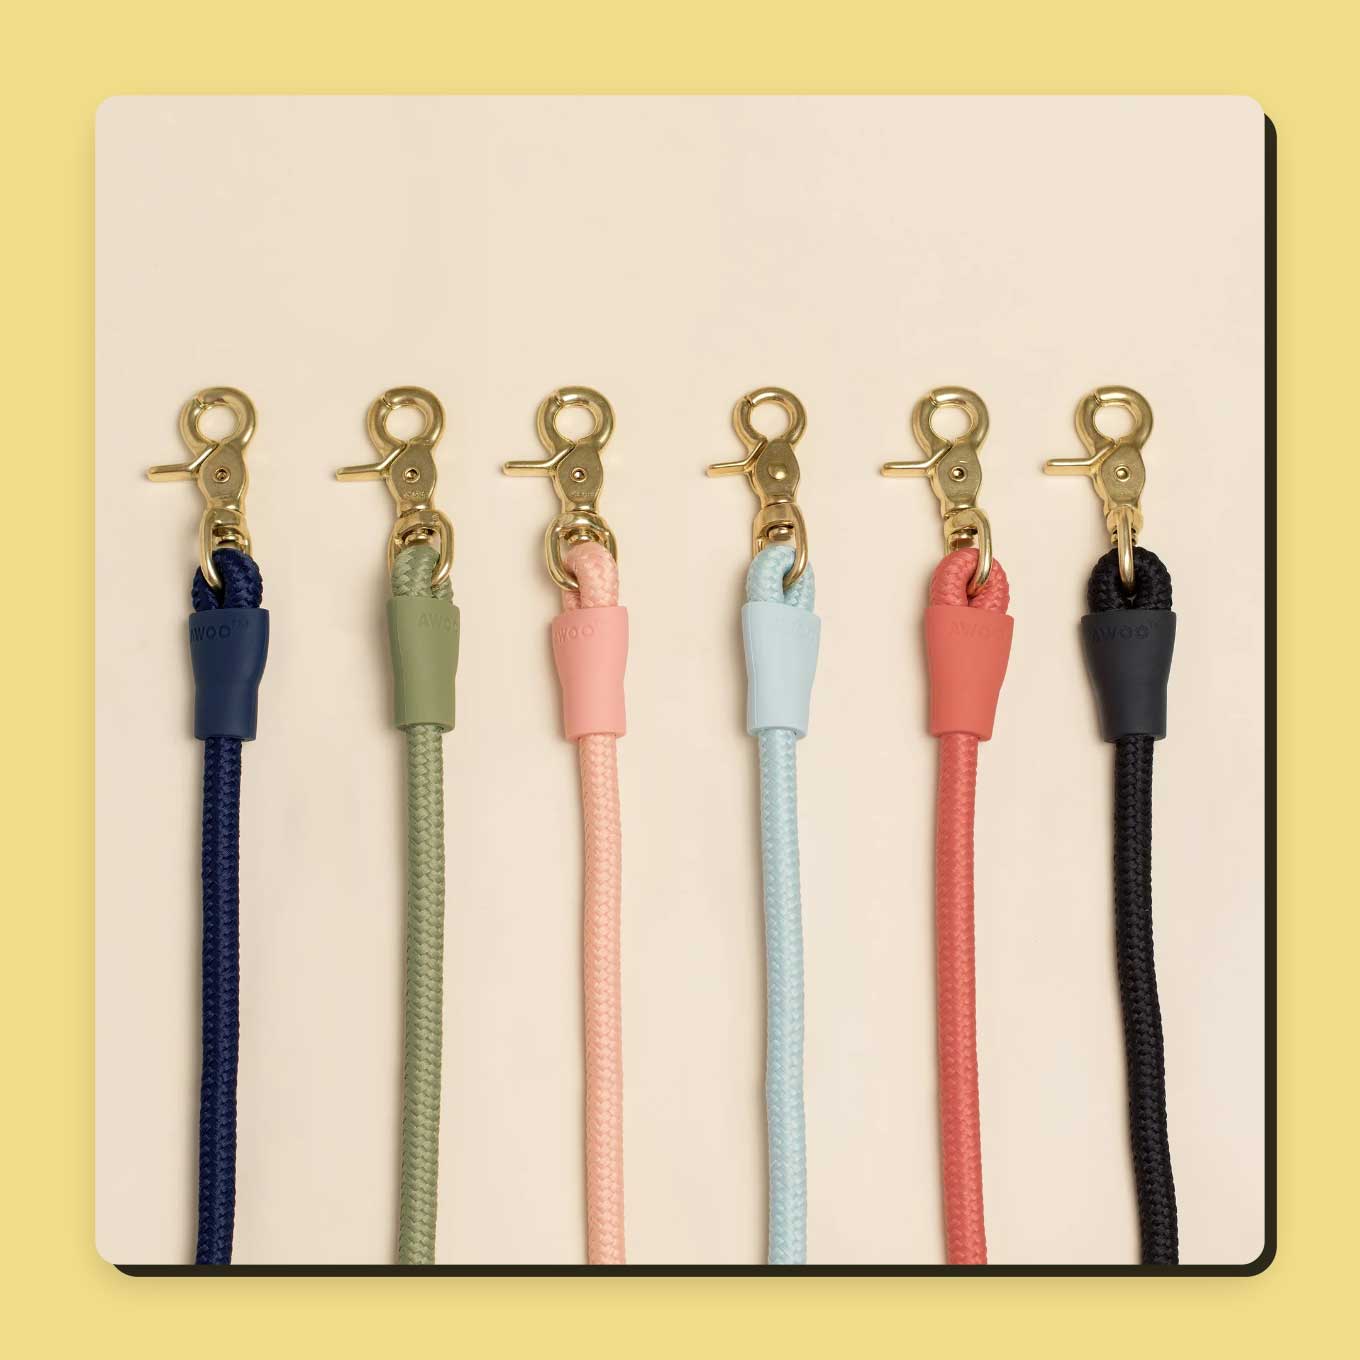 6 dog leashes in different colors